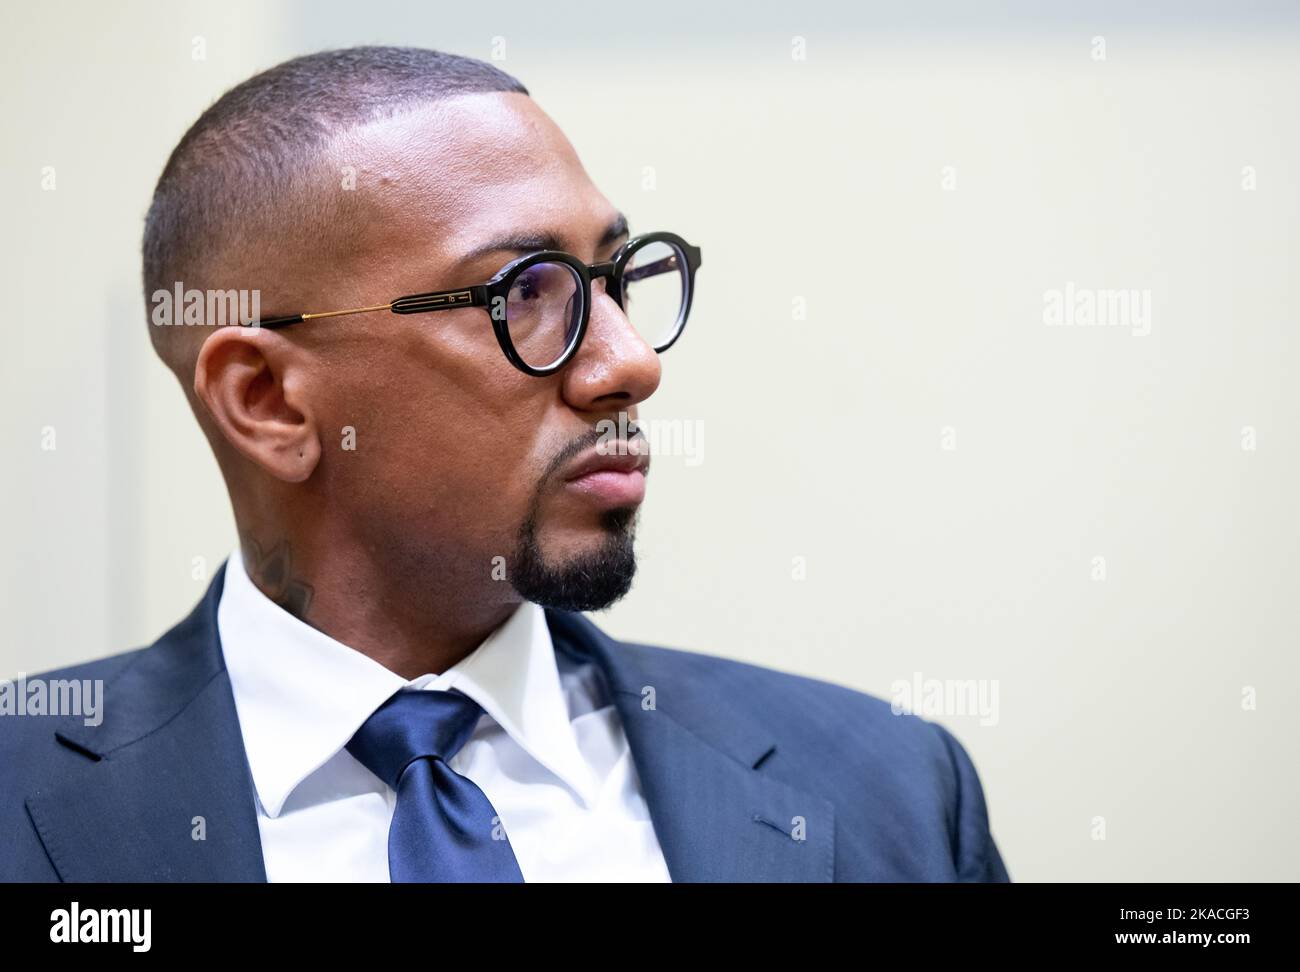 Munich, Germany. 02nd Nov, 2022. Professional footballer and former national team player Jerome Boateng is in the courtroom of the Munich I Regional Court at the start of the continuation in the appeal trial. Boateng is accused of beating his ex-girlfriend in 2018 during a joint Caribbean vacation. He was therefore sentenced last year to a fine of 1.8 million euros. He, the public prosecutor's office and his ex-girlfriend as joint plaintiff appealed against this decision of the Munich Local Court. Credit: Sven Hoppe/dpa/Alamy Live News Stock Photo